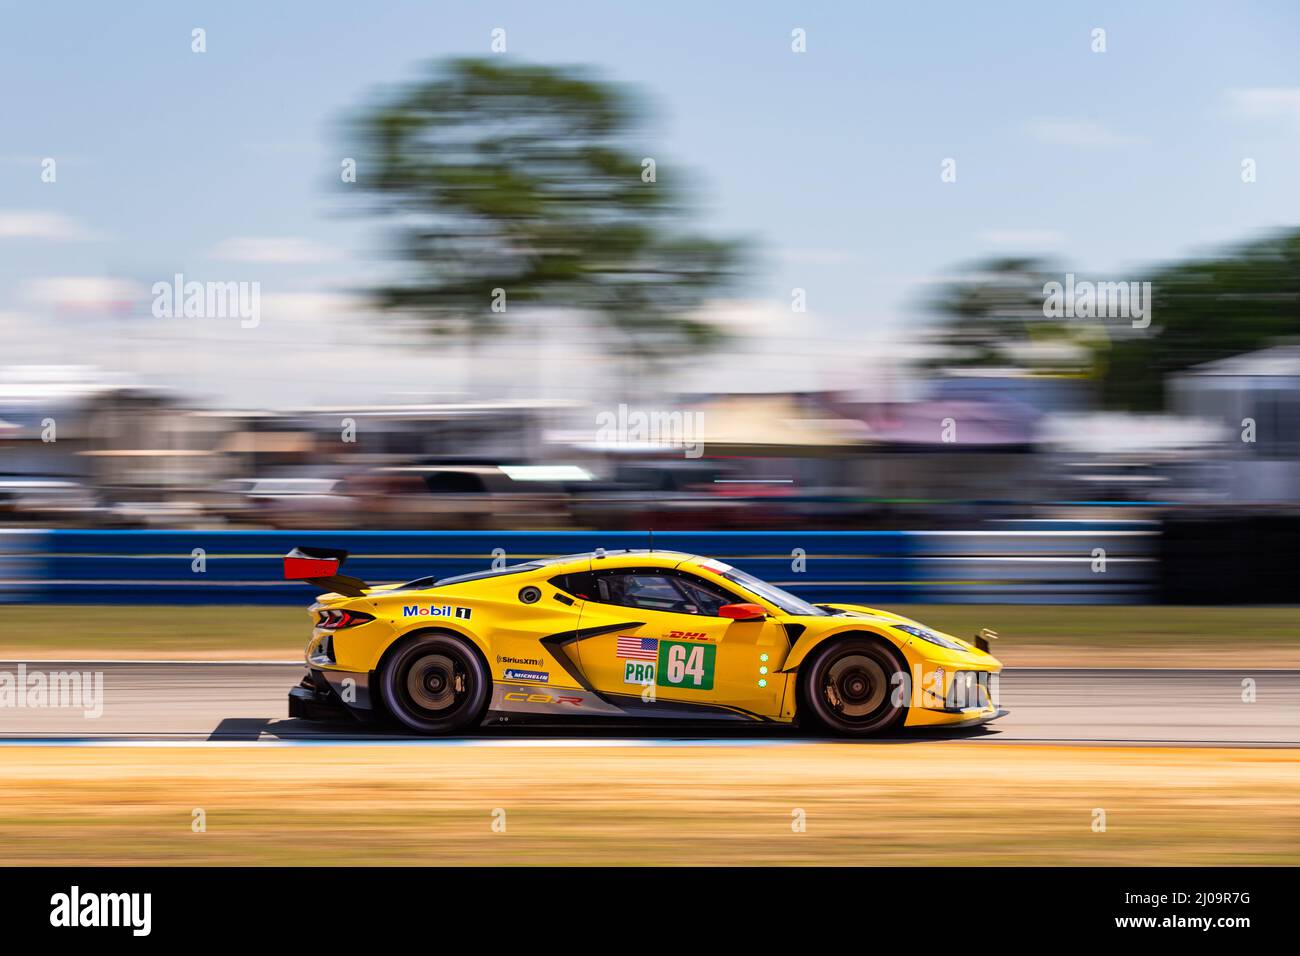 C8 corvette hi-res stock photography and images - Alamy